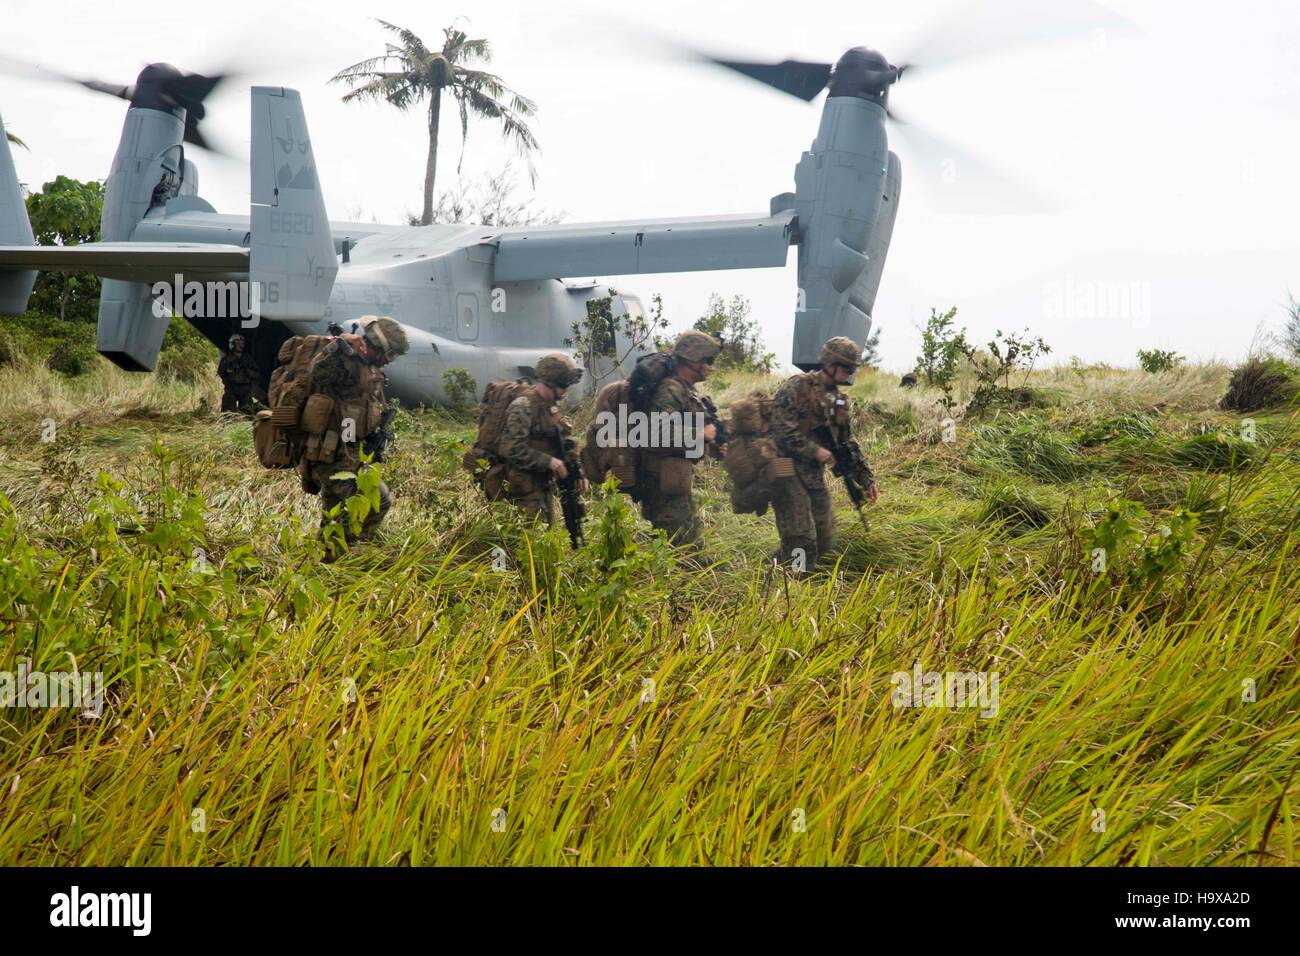 U.S. soldiers exit an MV-22 Osprey tiltrotor aircraft during exercise Tiger Strike November 11, 2016 in the Sabah Province, Malaysia. Stock Photo